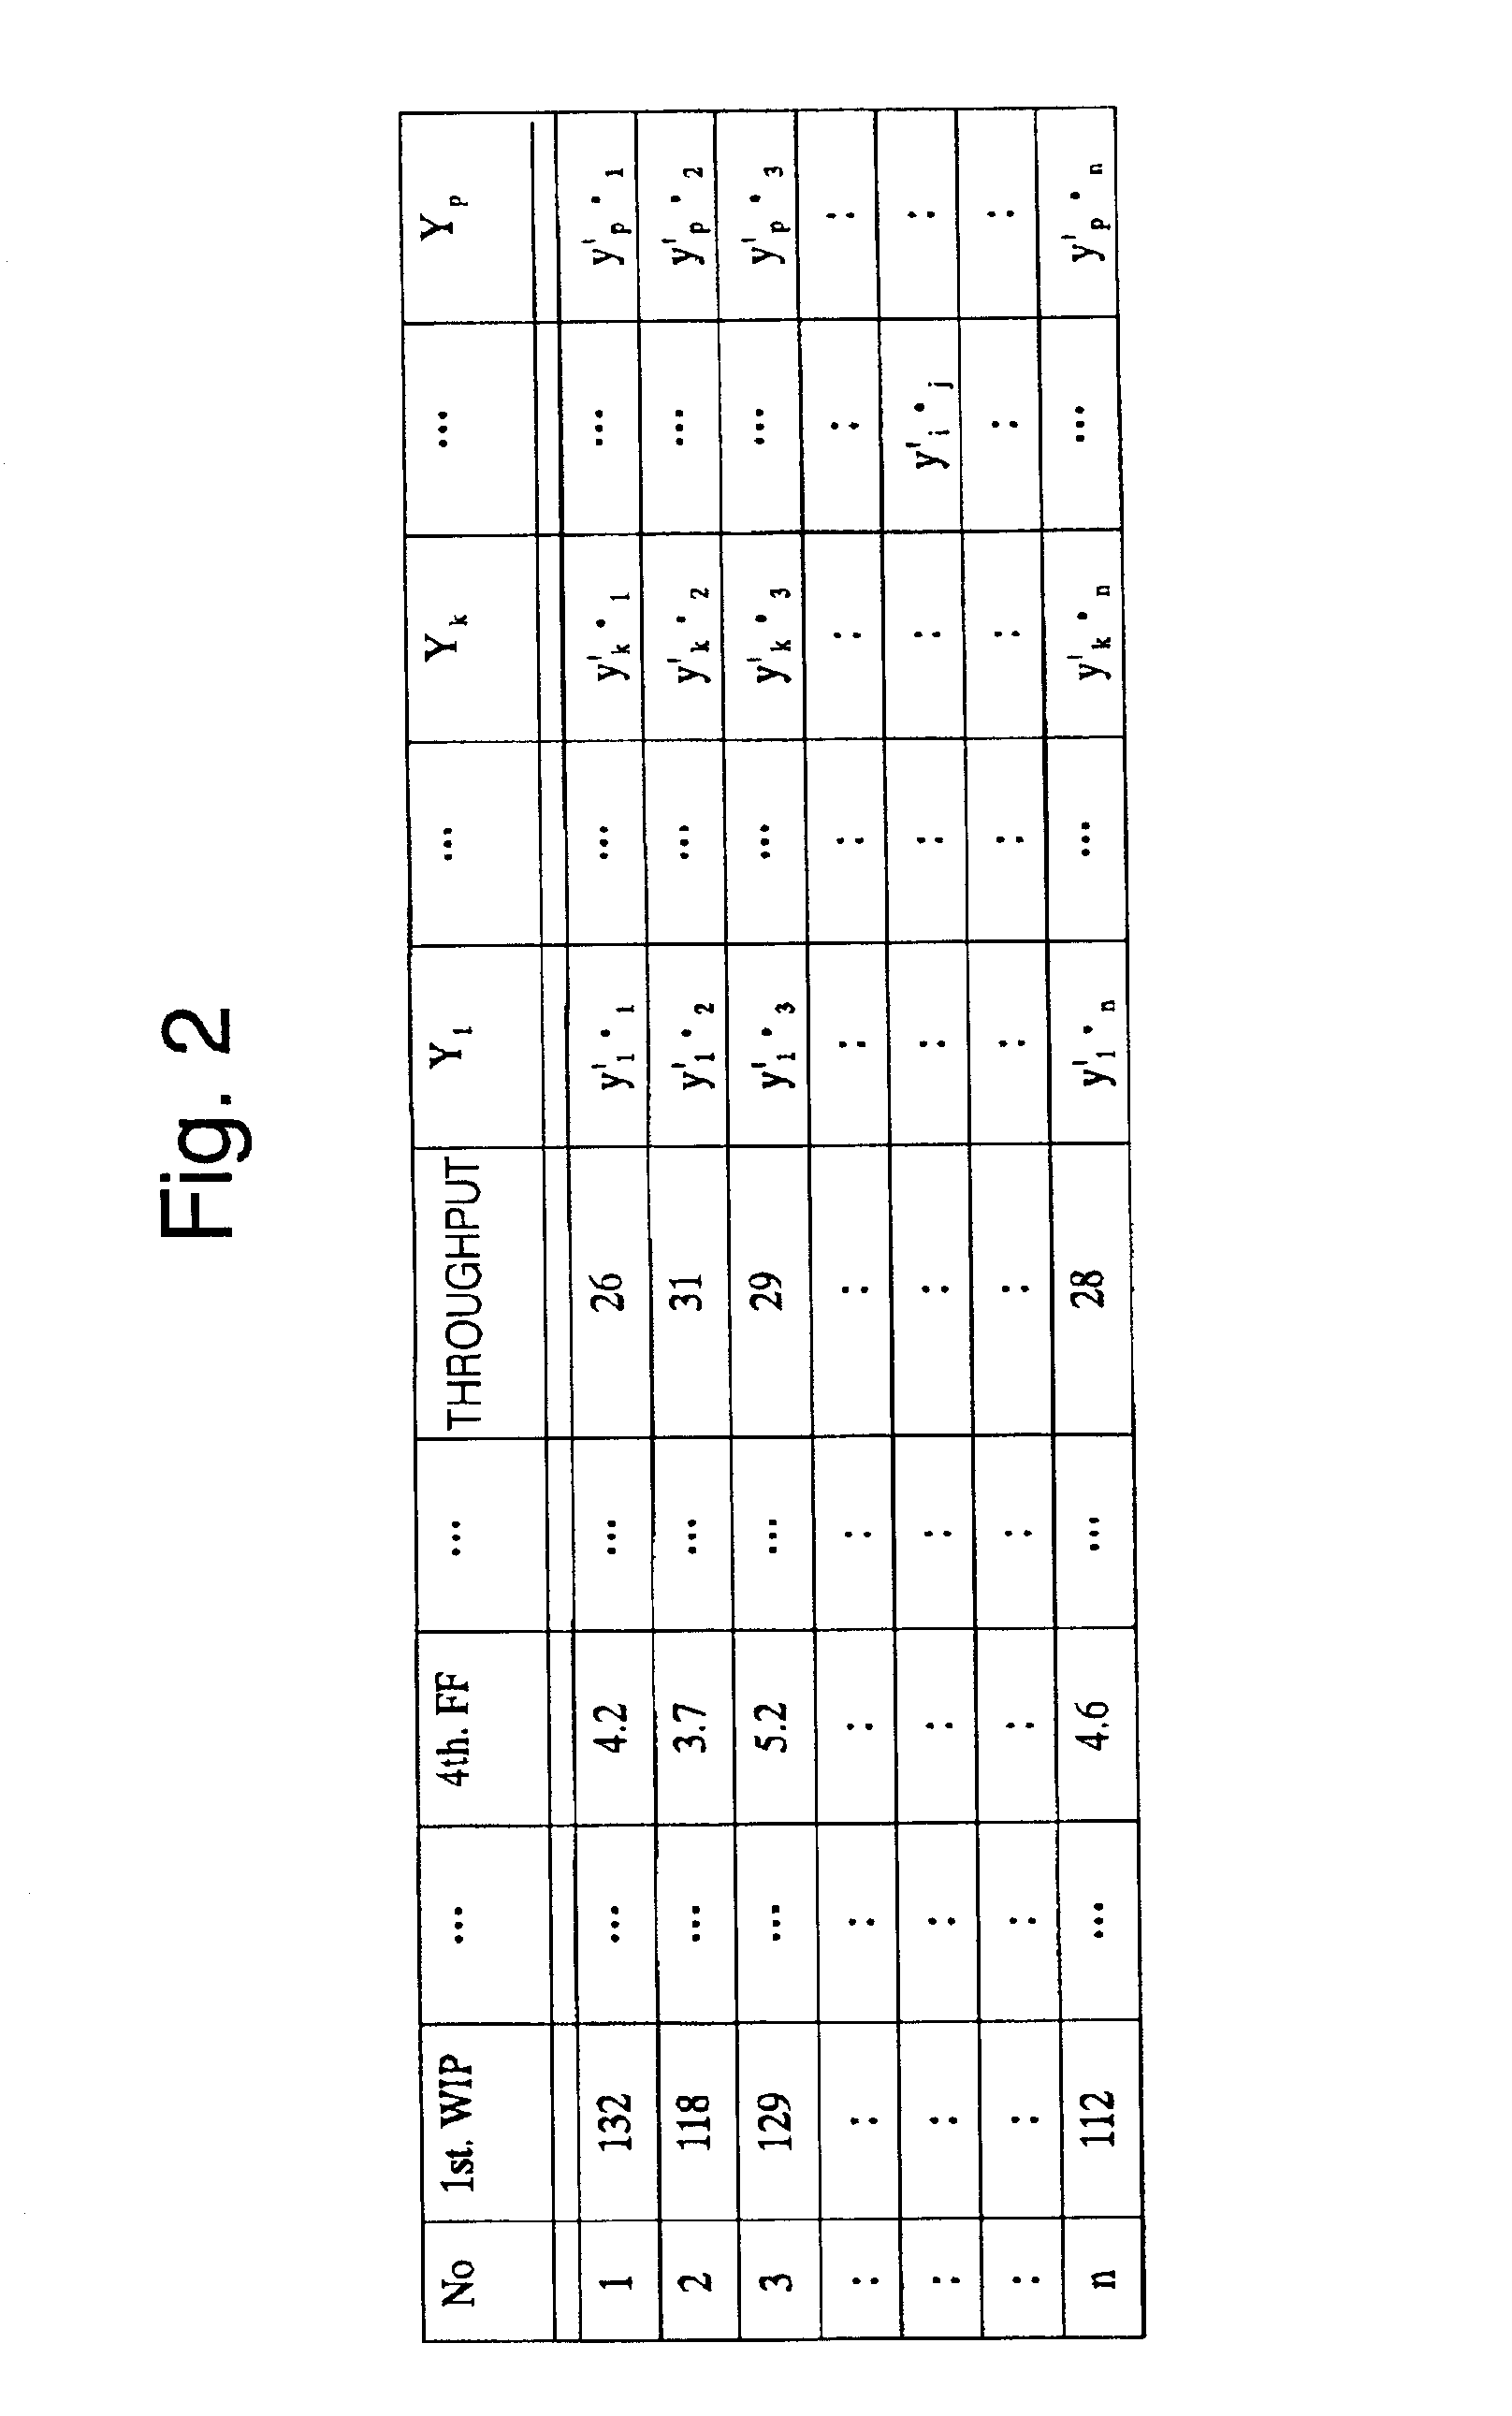 Controlling method for manufacturing process